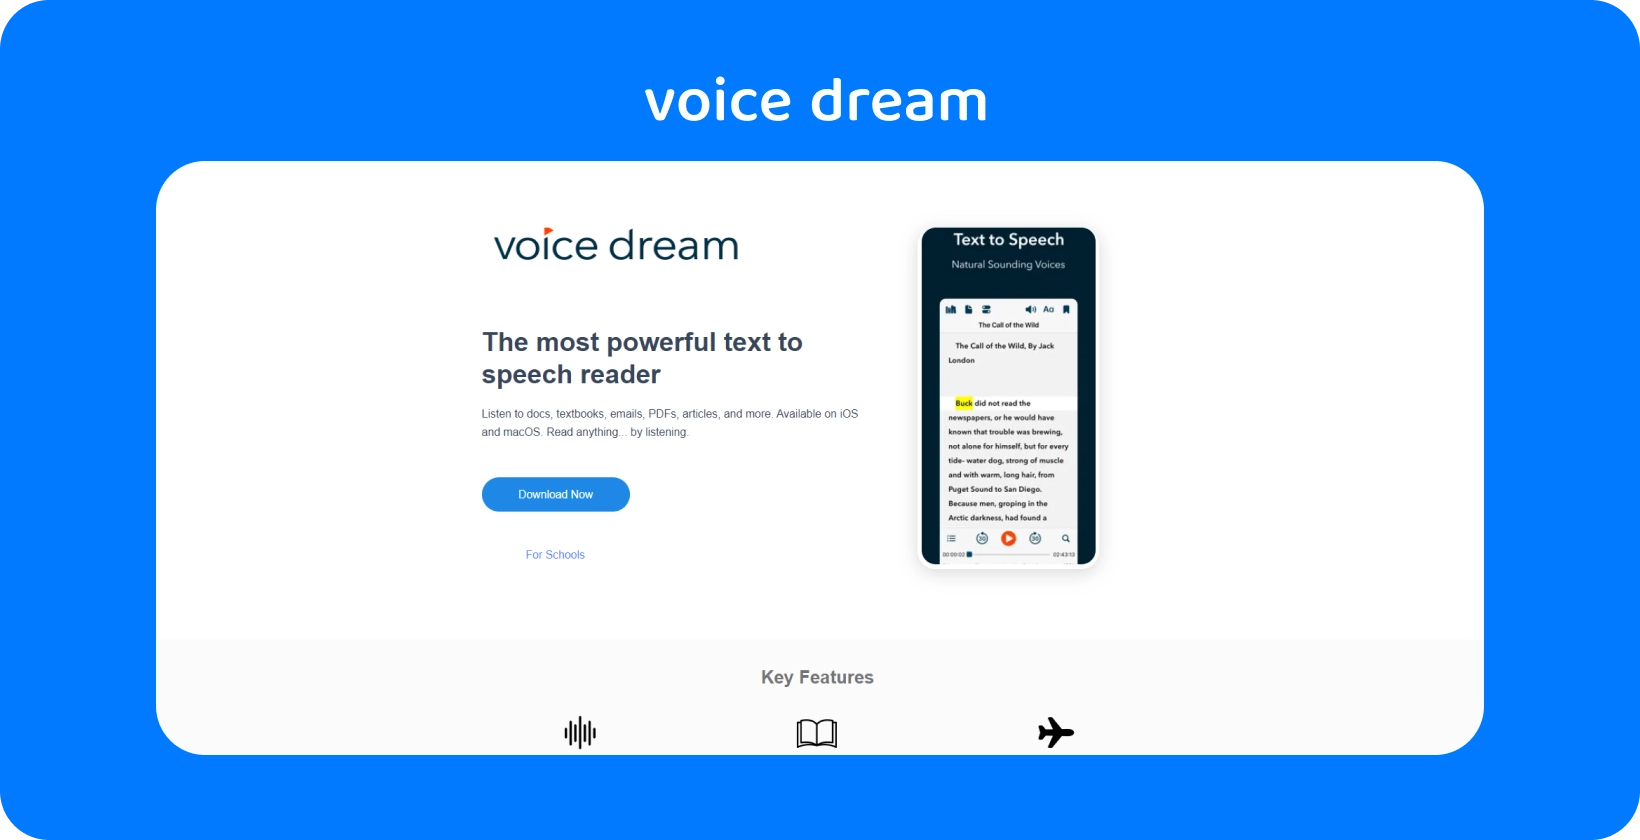 Voice Dream app interface showcasing a powerful text-to-speech reader for various documents on mobile devices.